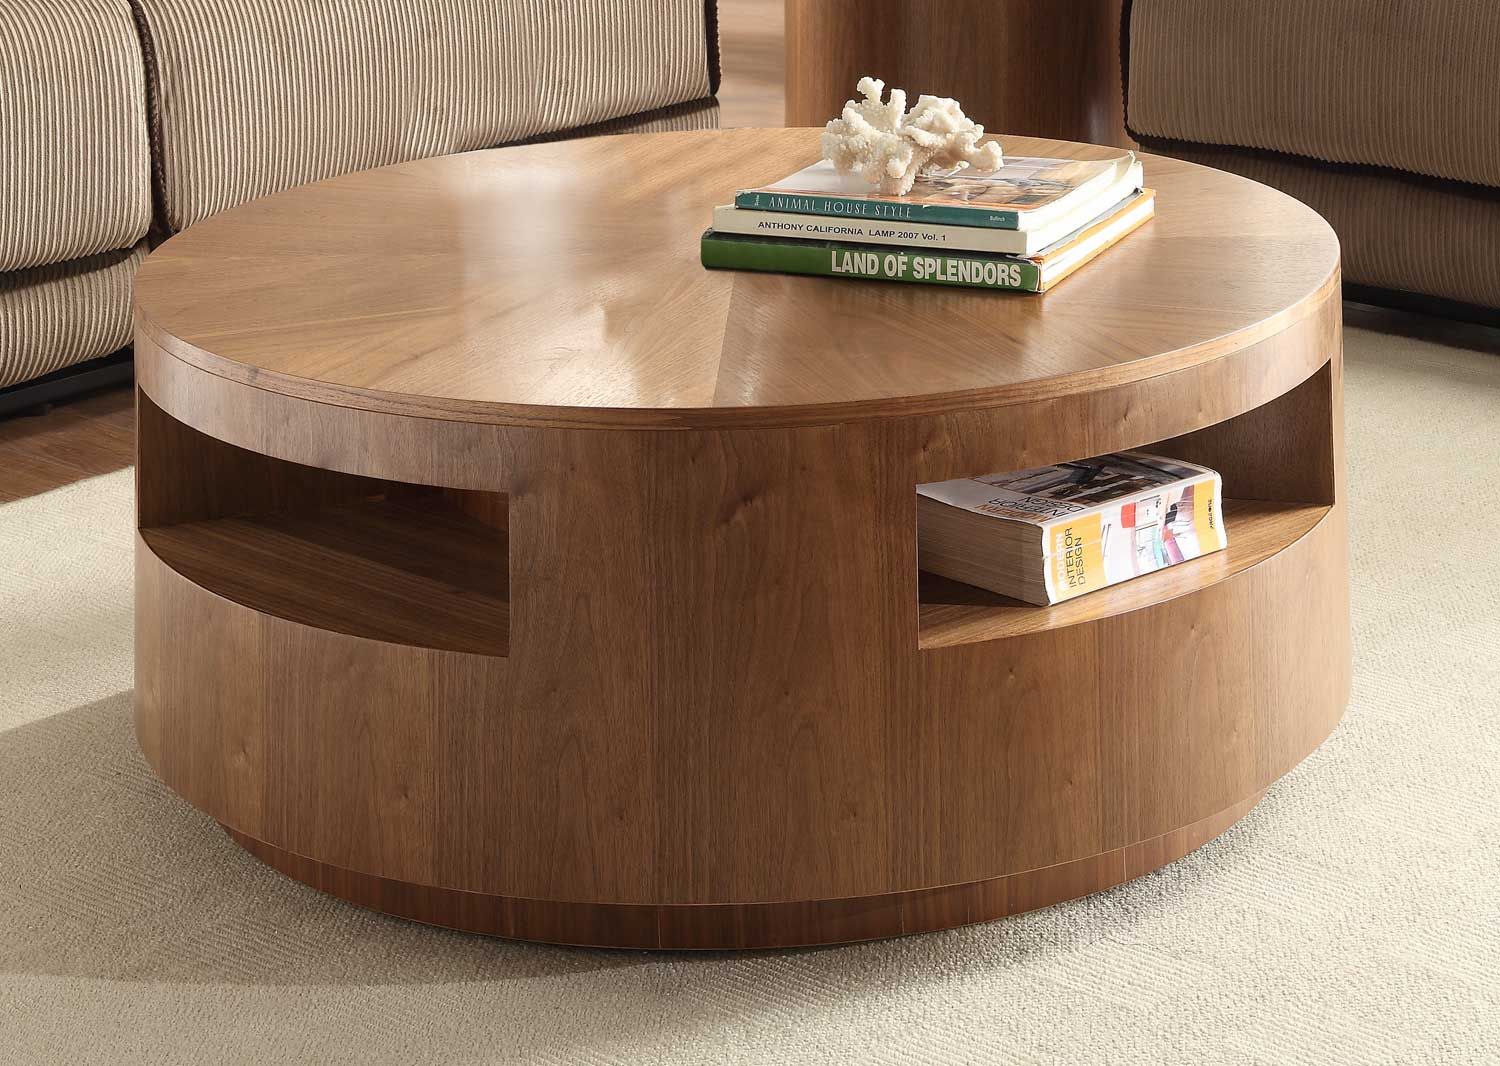 The Round Coffee Tables With Storage – The Simple And Compact Furniture Inside Round Coffee Tables With Storage (View 2 of 20)